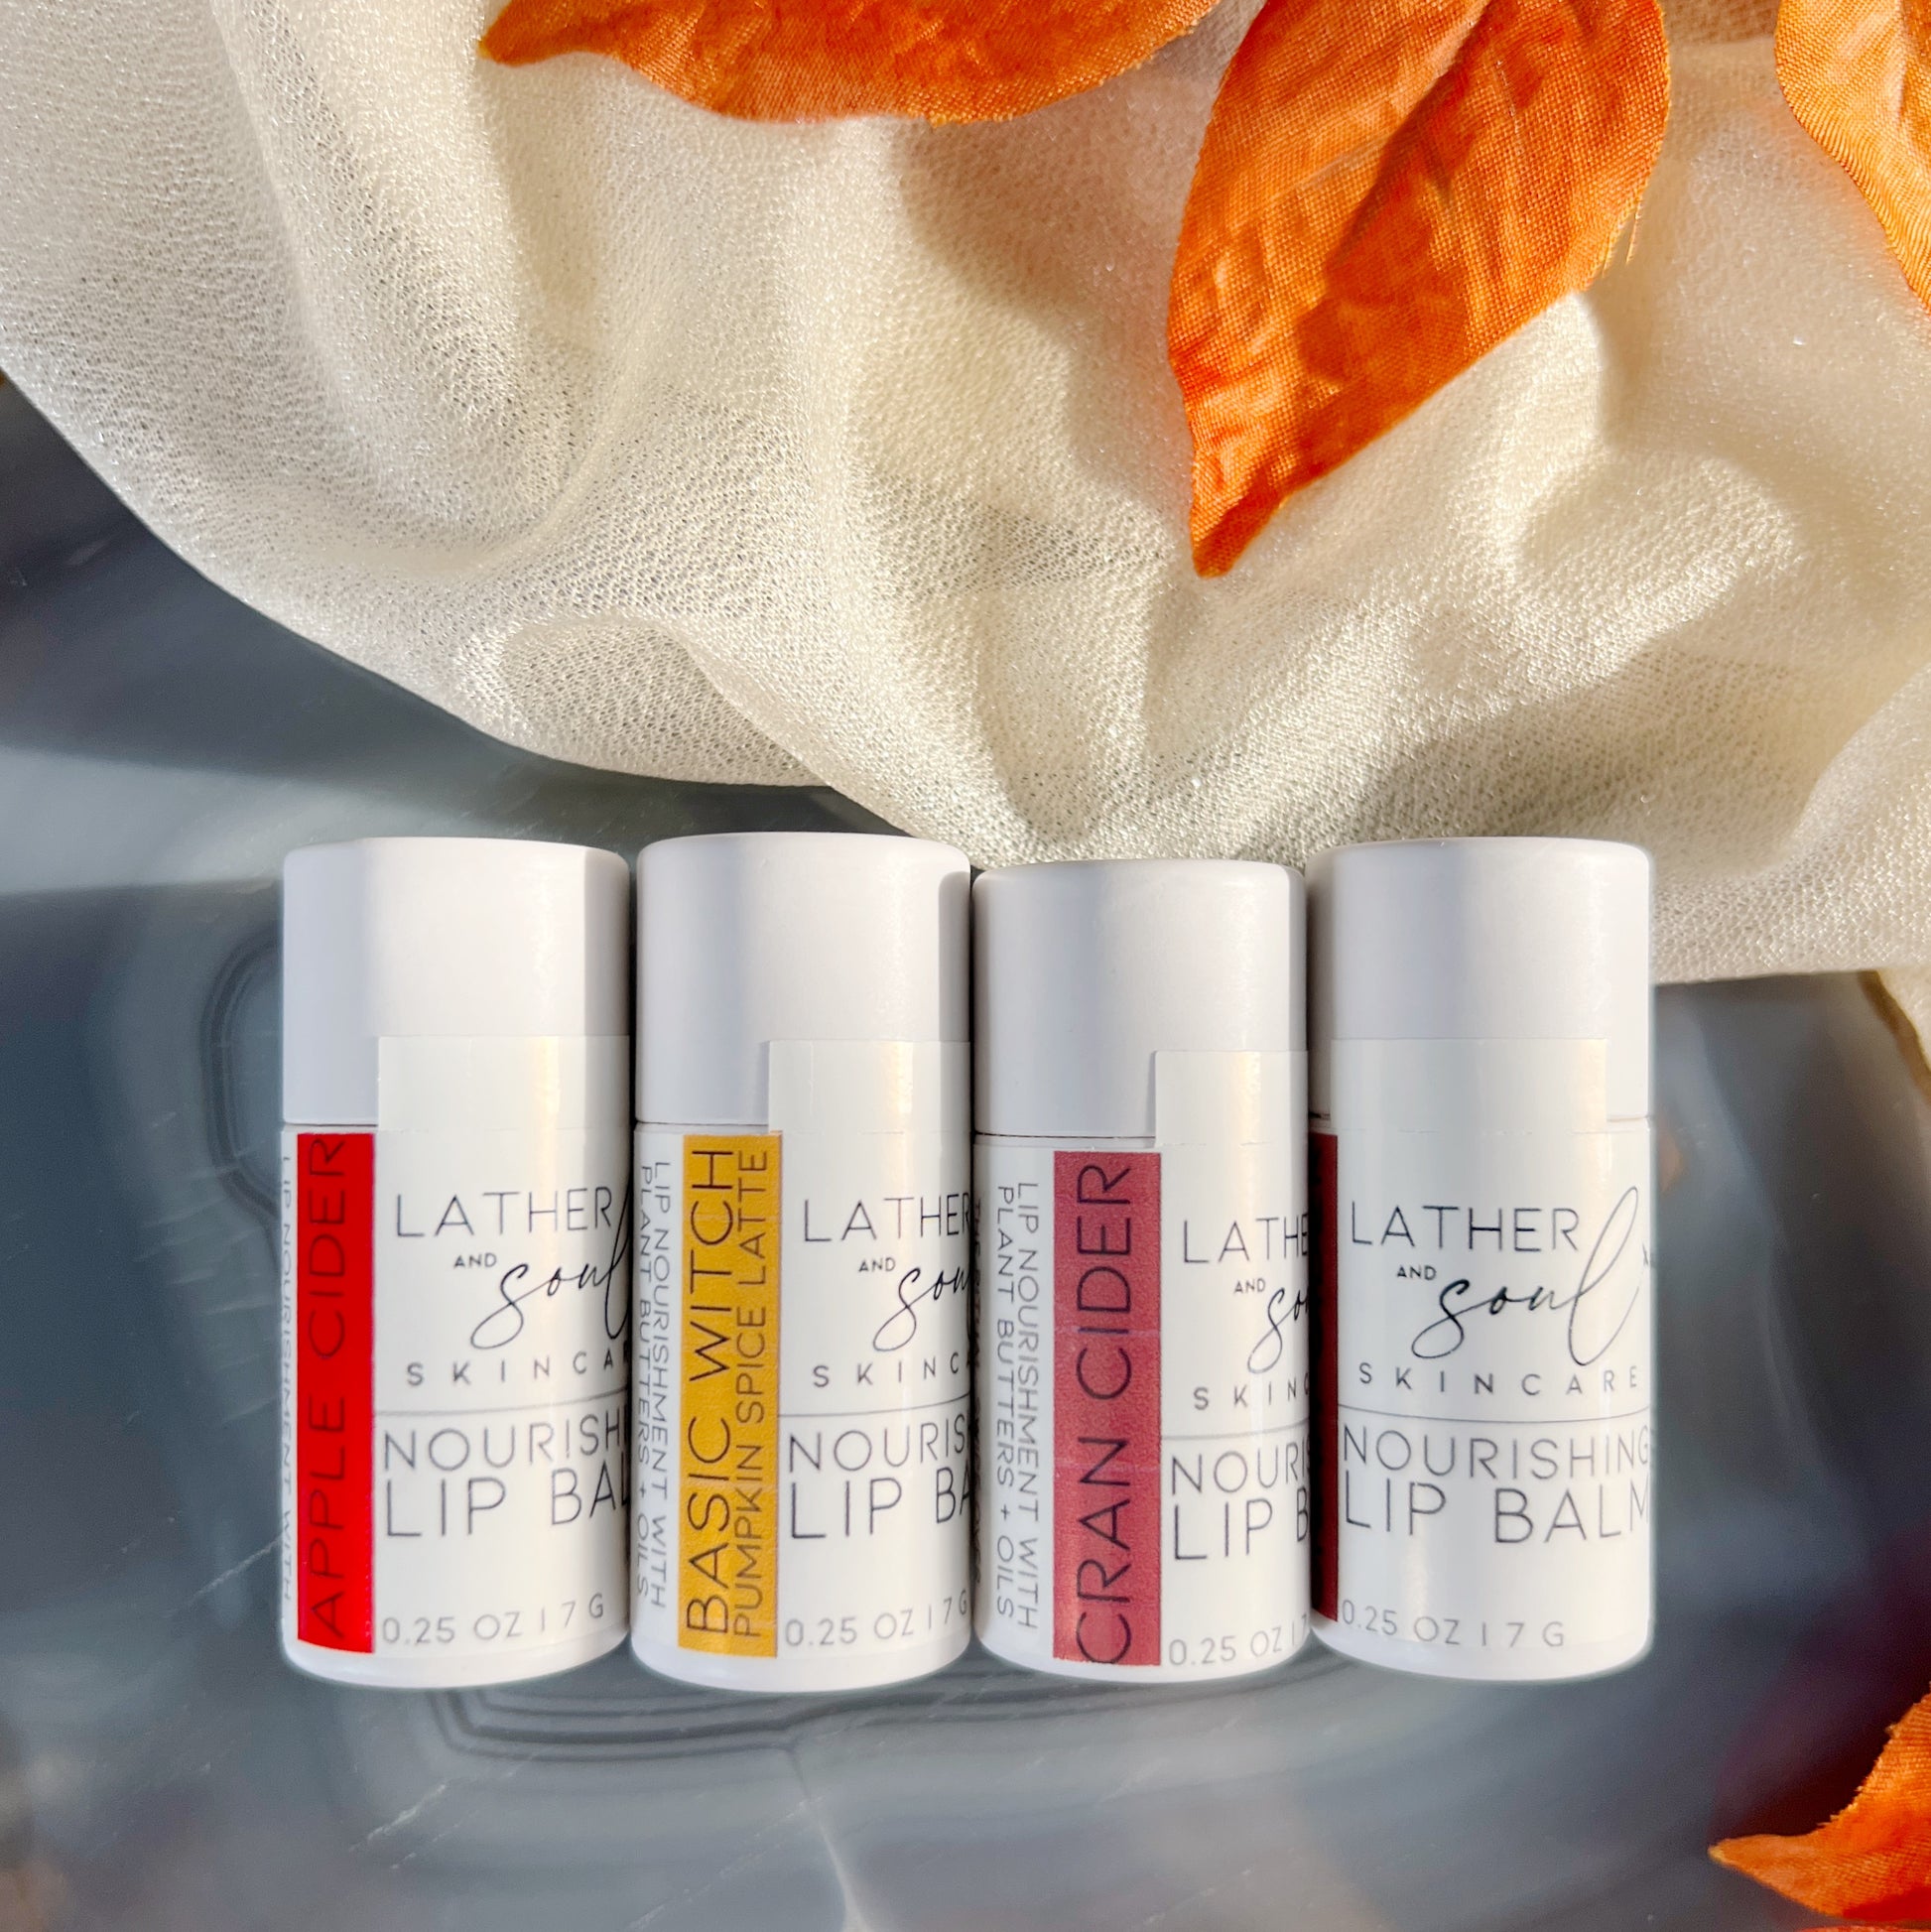 Fall Collection of eco friendly and organic lip balms from Lather and Soul